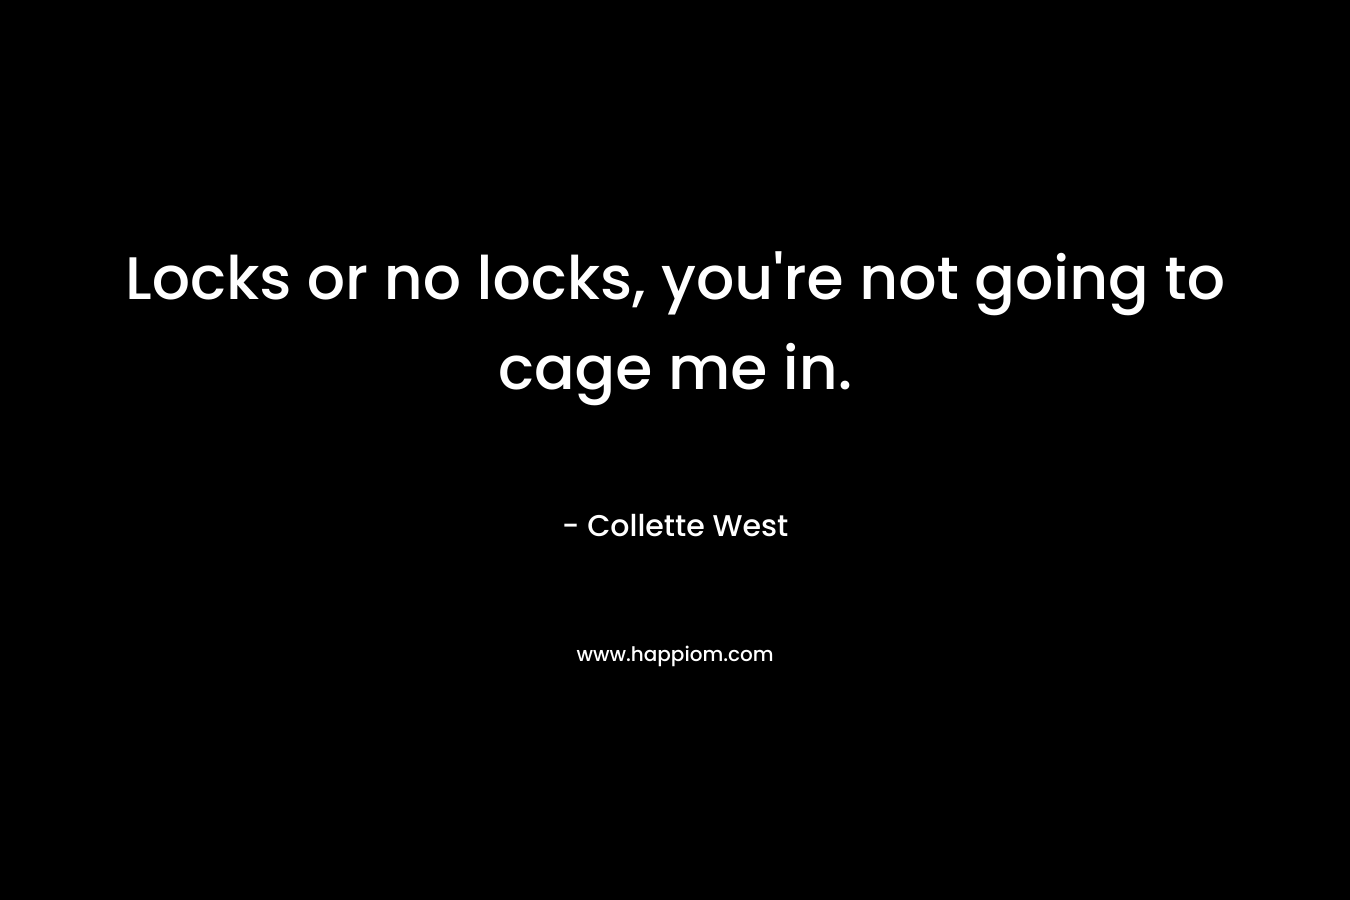 Locks or no locks, you’re not going to cage me in. – Collette West